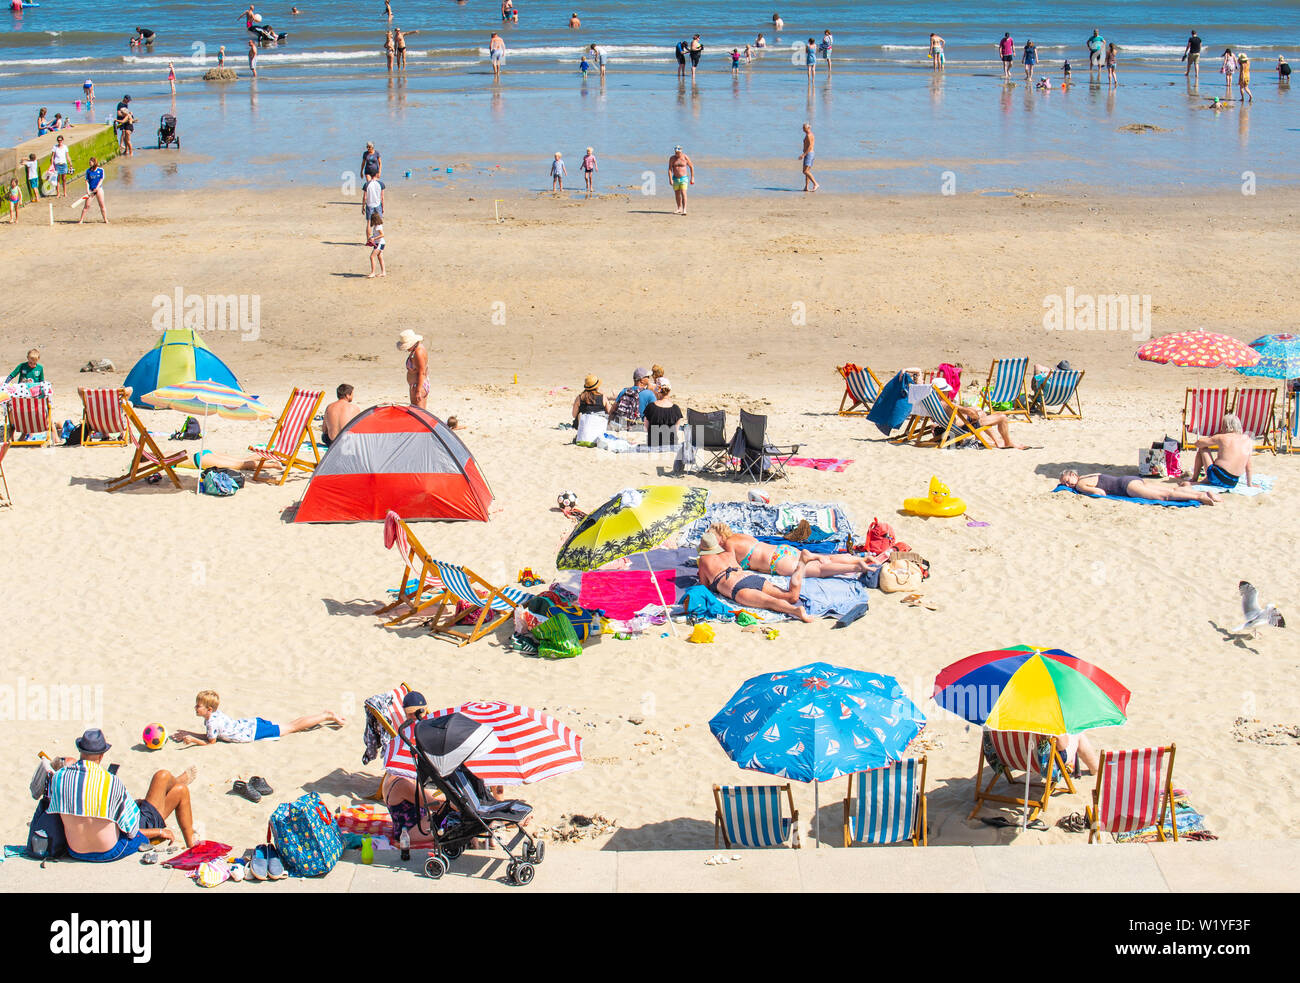 Lyme Regis, Dorset, UK. 4th July 2019. UK Weather: The beach at the seaside resort of Lyme Regis was busy this afternoon as sunseekers enjoyed the scorching hot sunshine and blue skies. Credit: Celia McMahon/Alamy Live News. Stock Photo